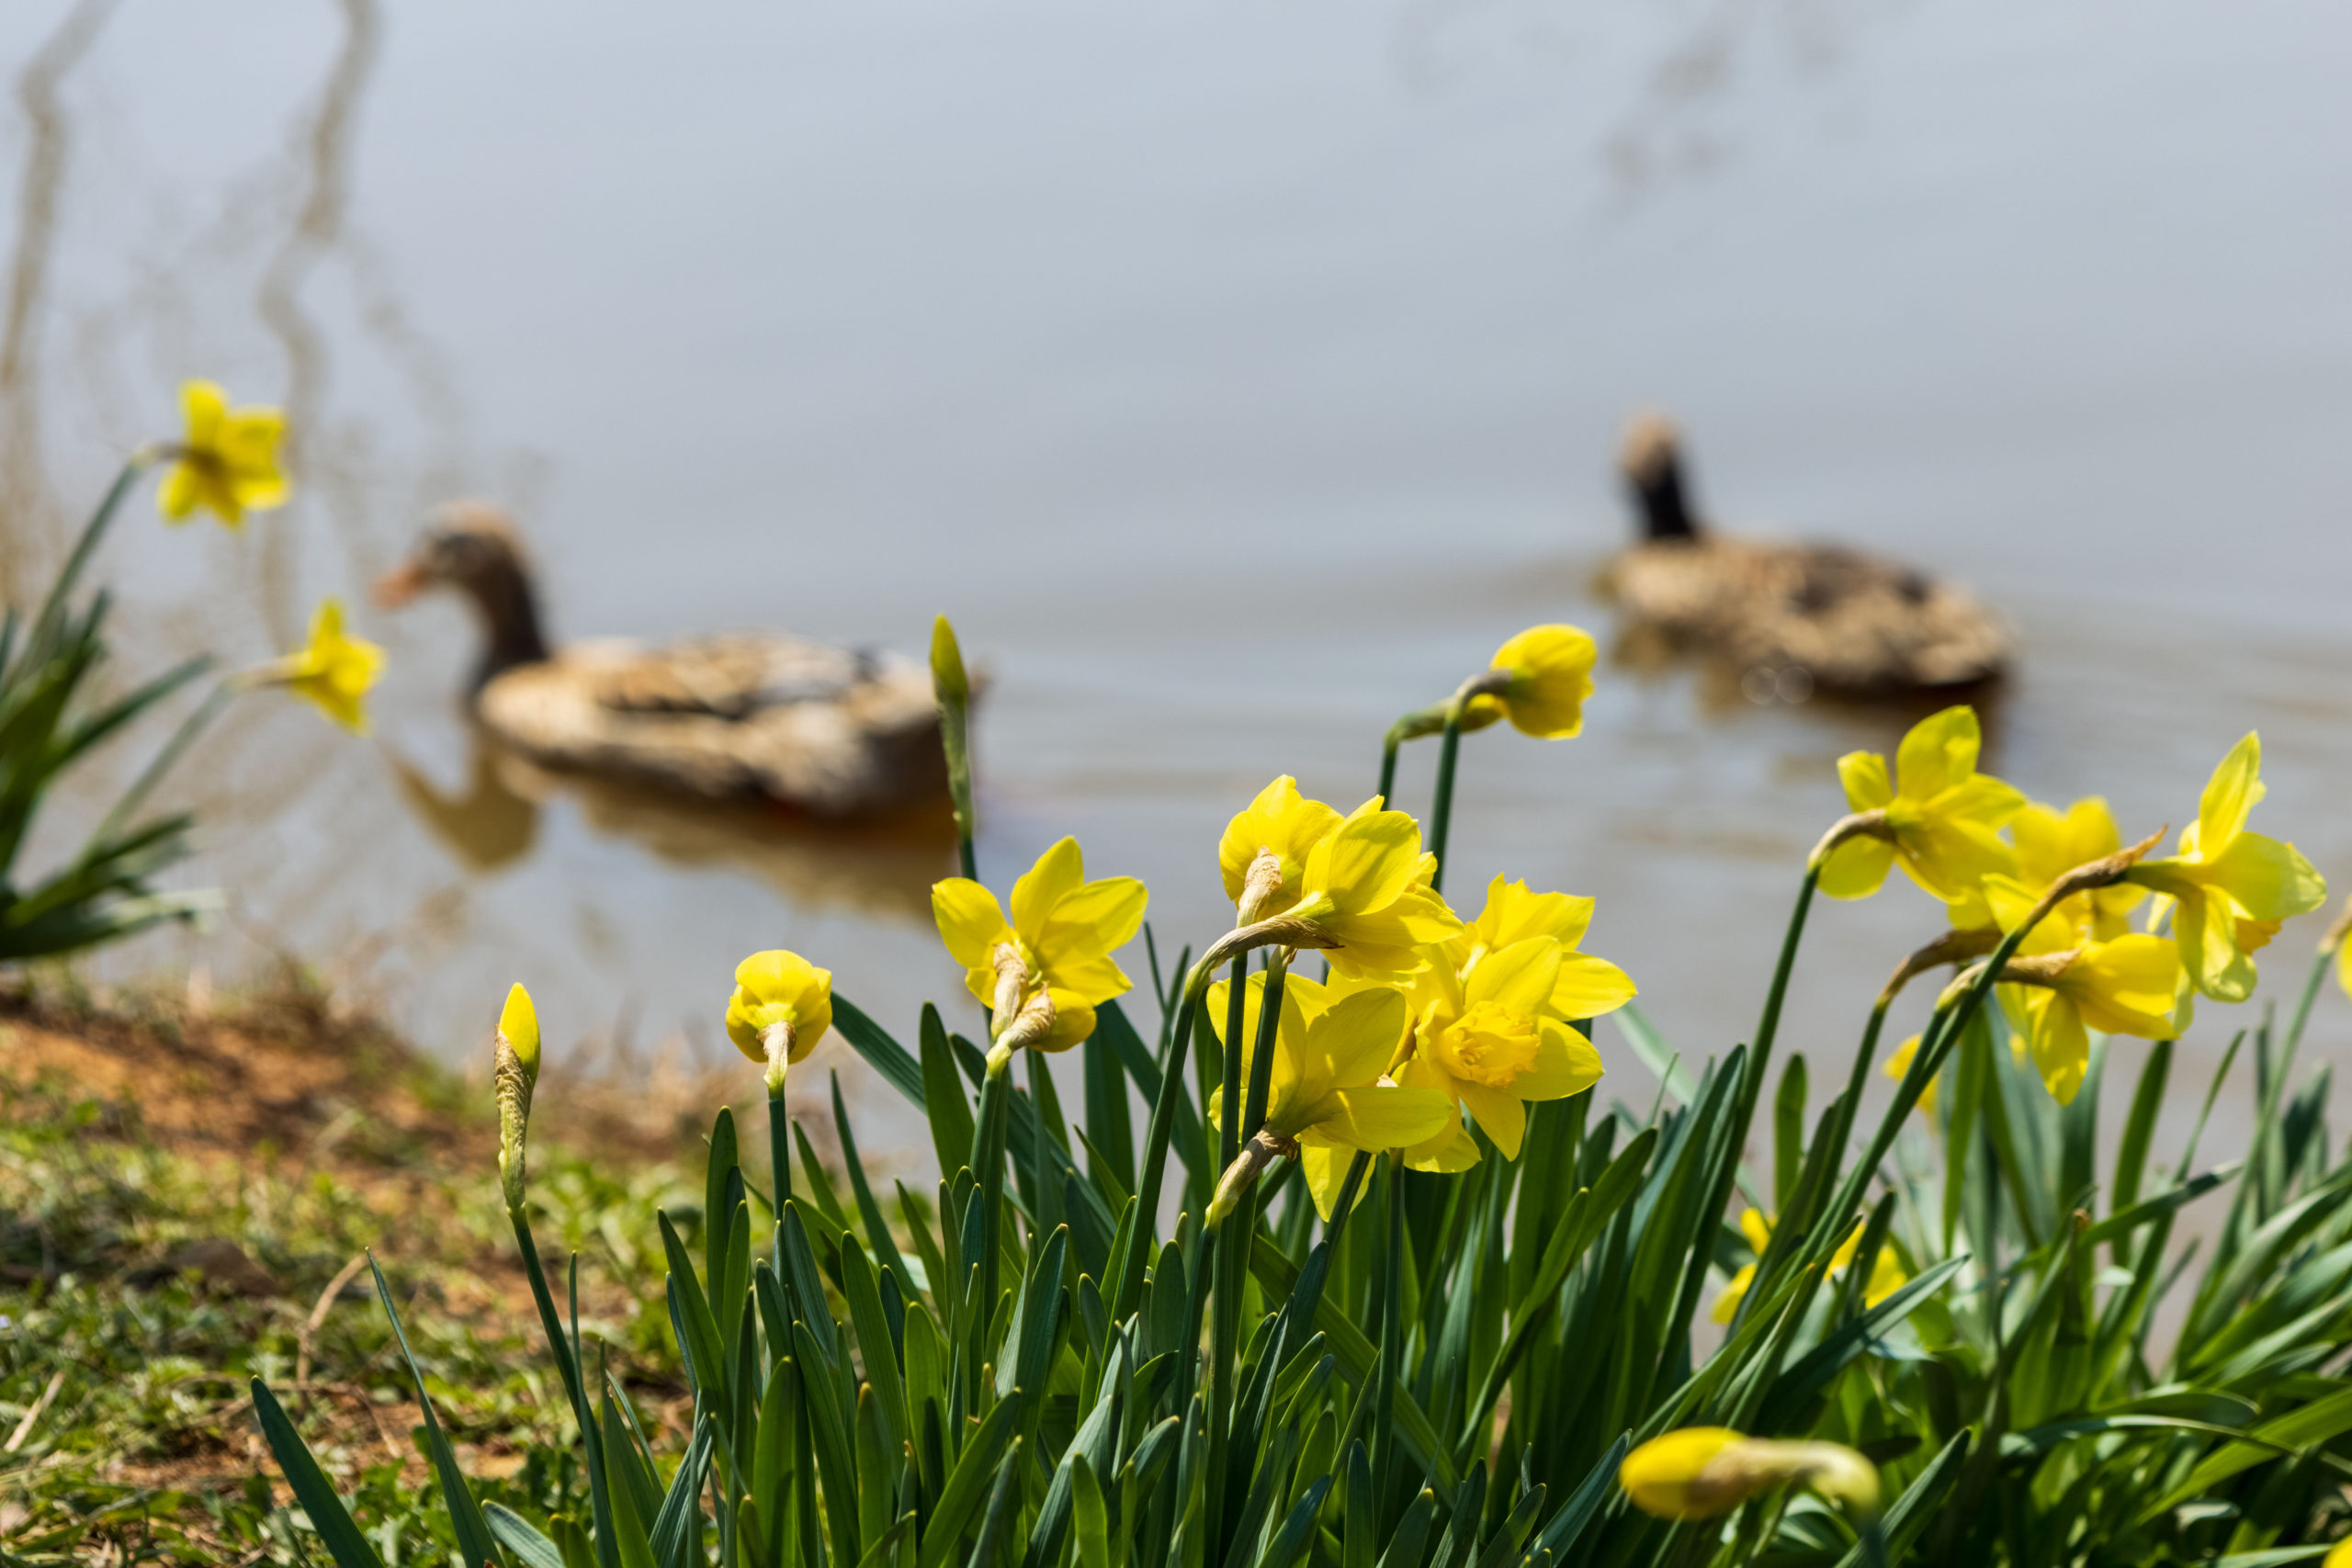 daffodils by lake with ducks in background